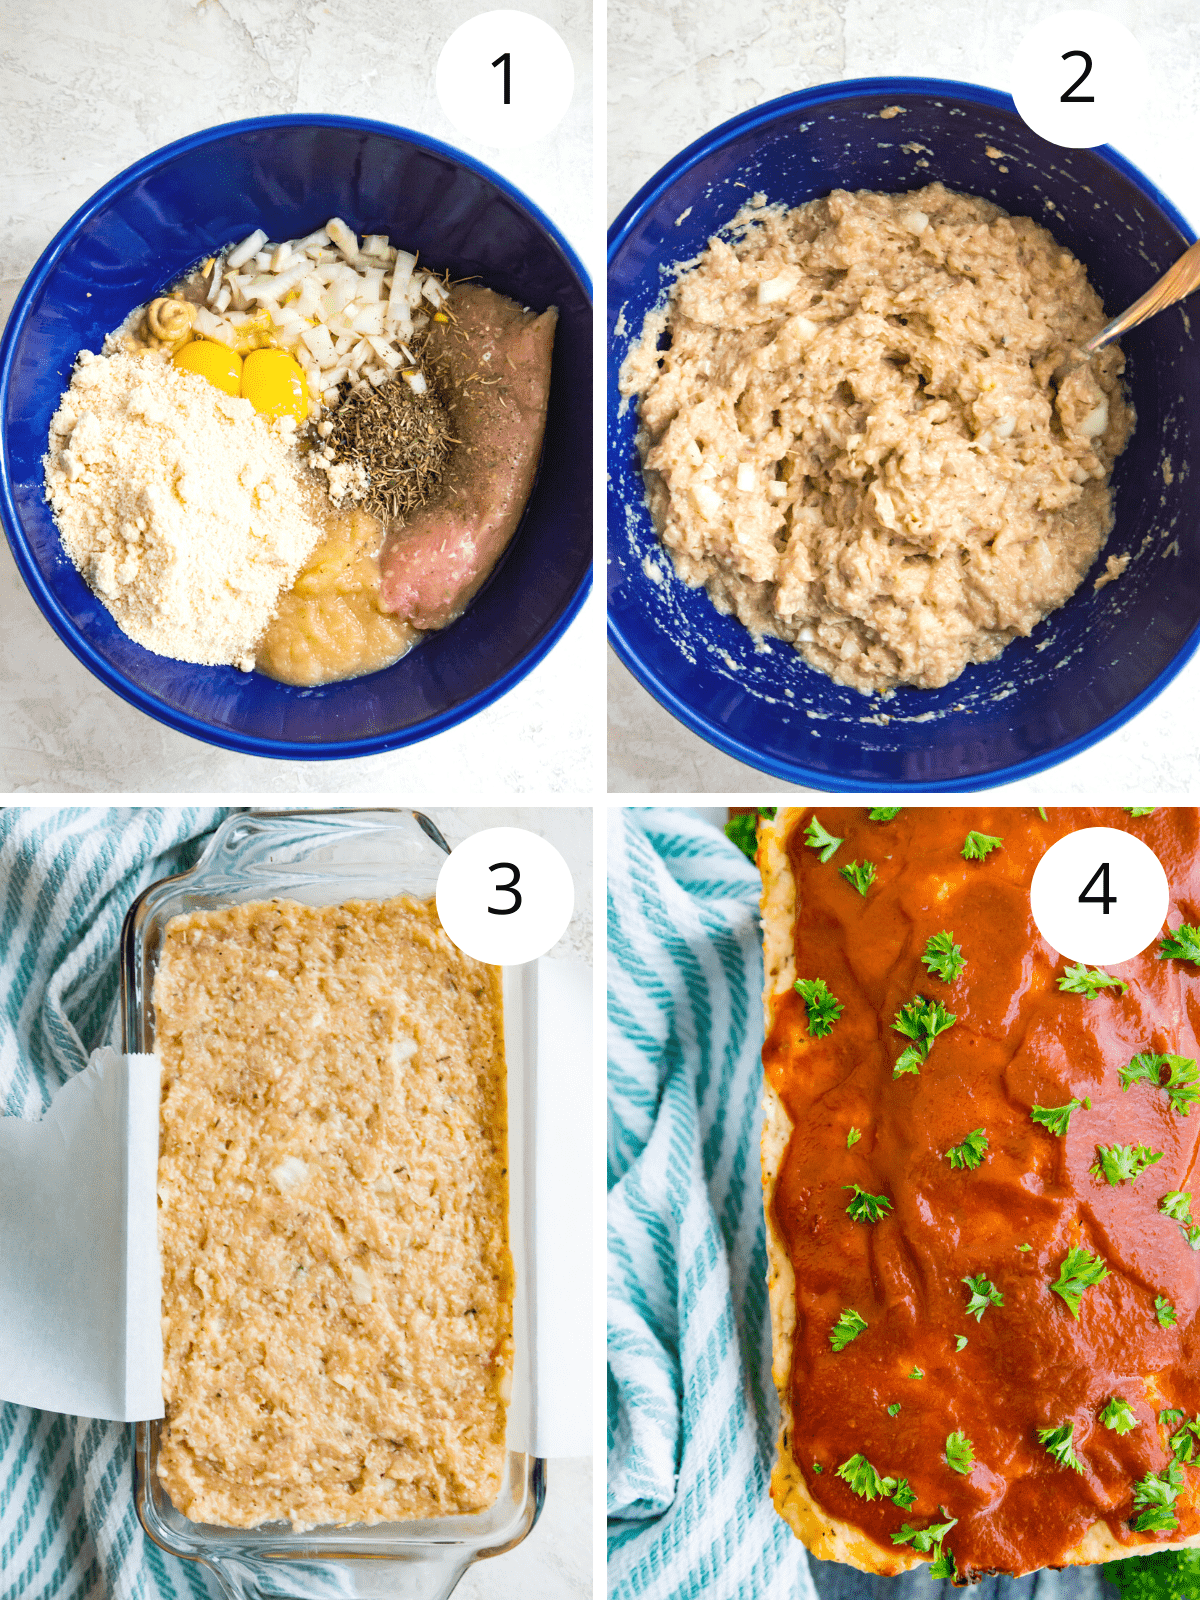 Step by step directions for making a ground chicken meatloaf recipe.